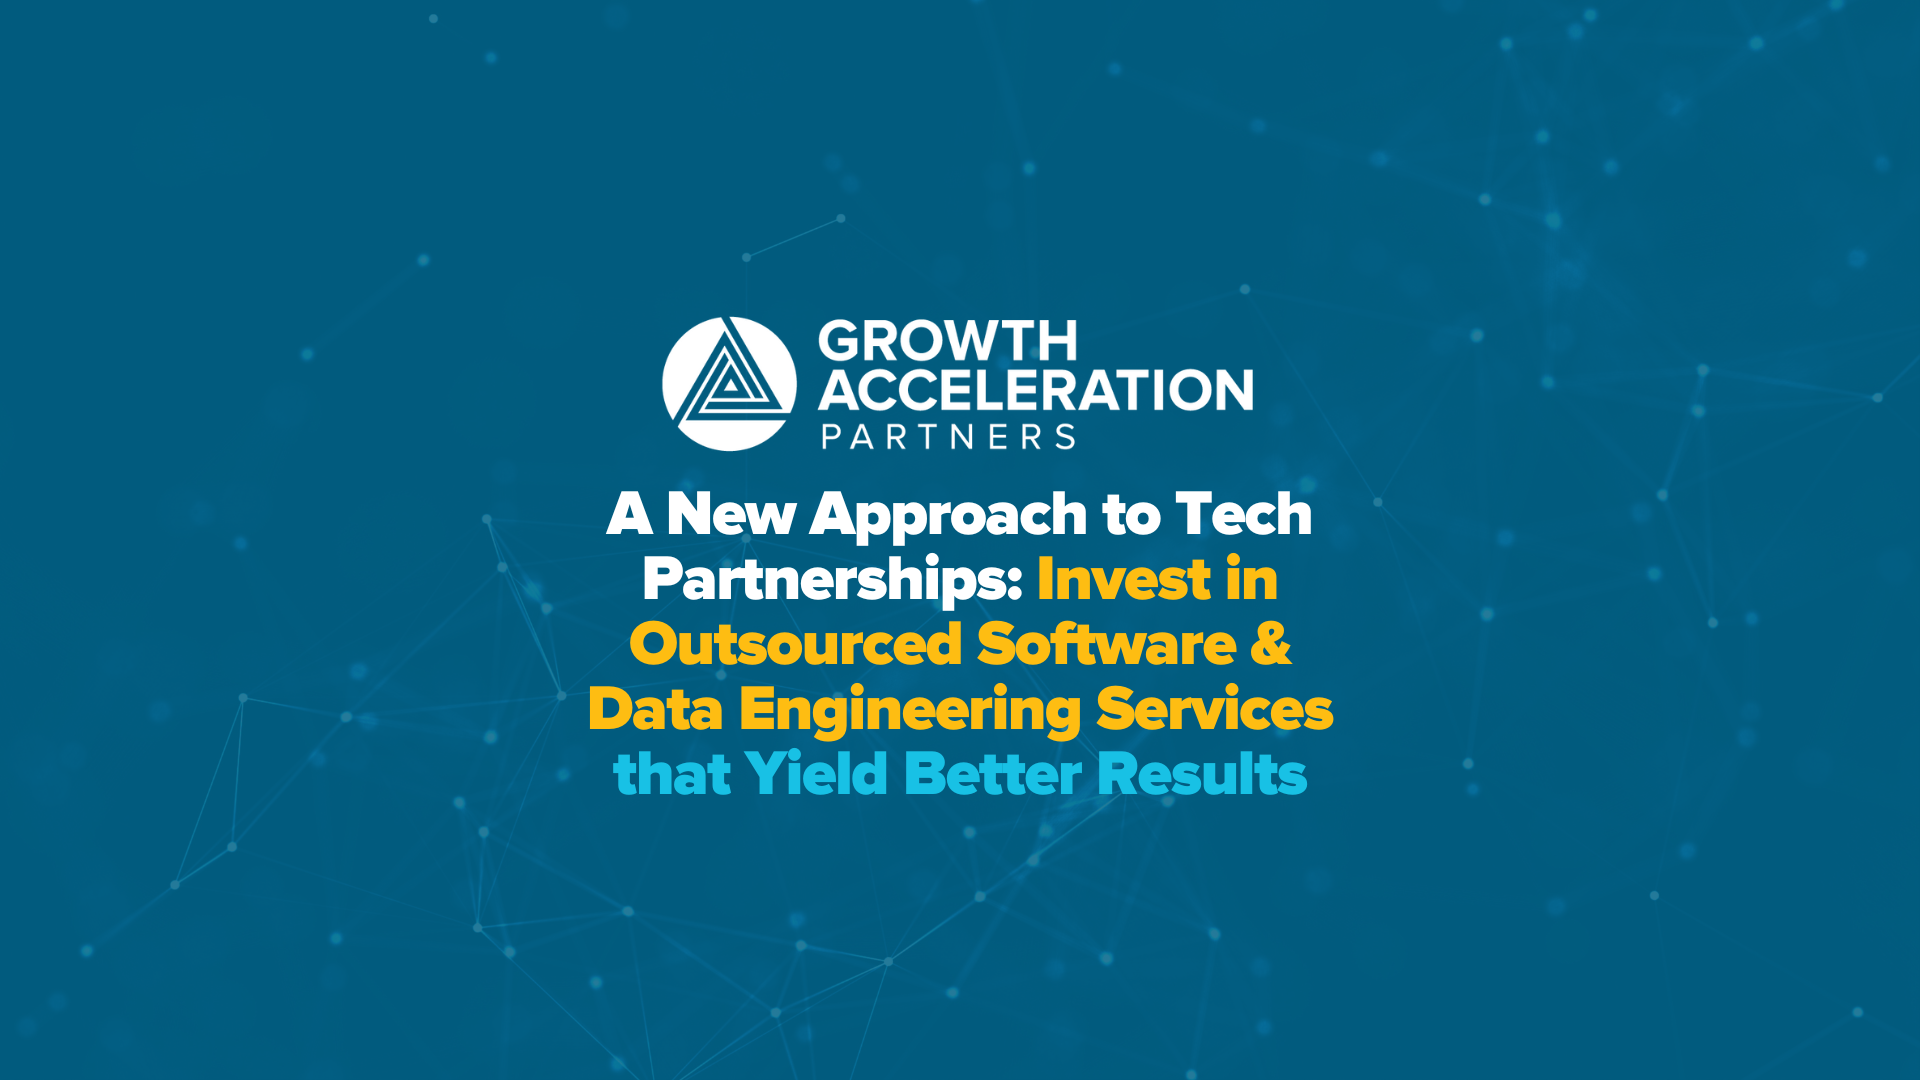 A New Approach to Tech Partnerships: Invest in Outsourced Software & Data Engineering Services that Yield Better Results